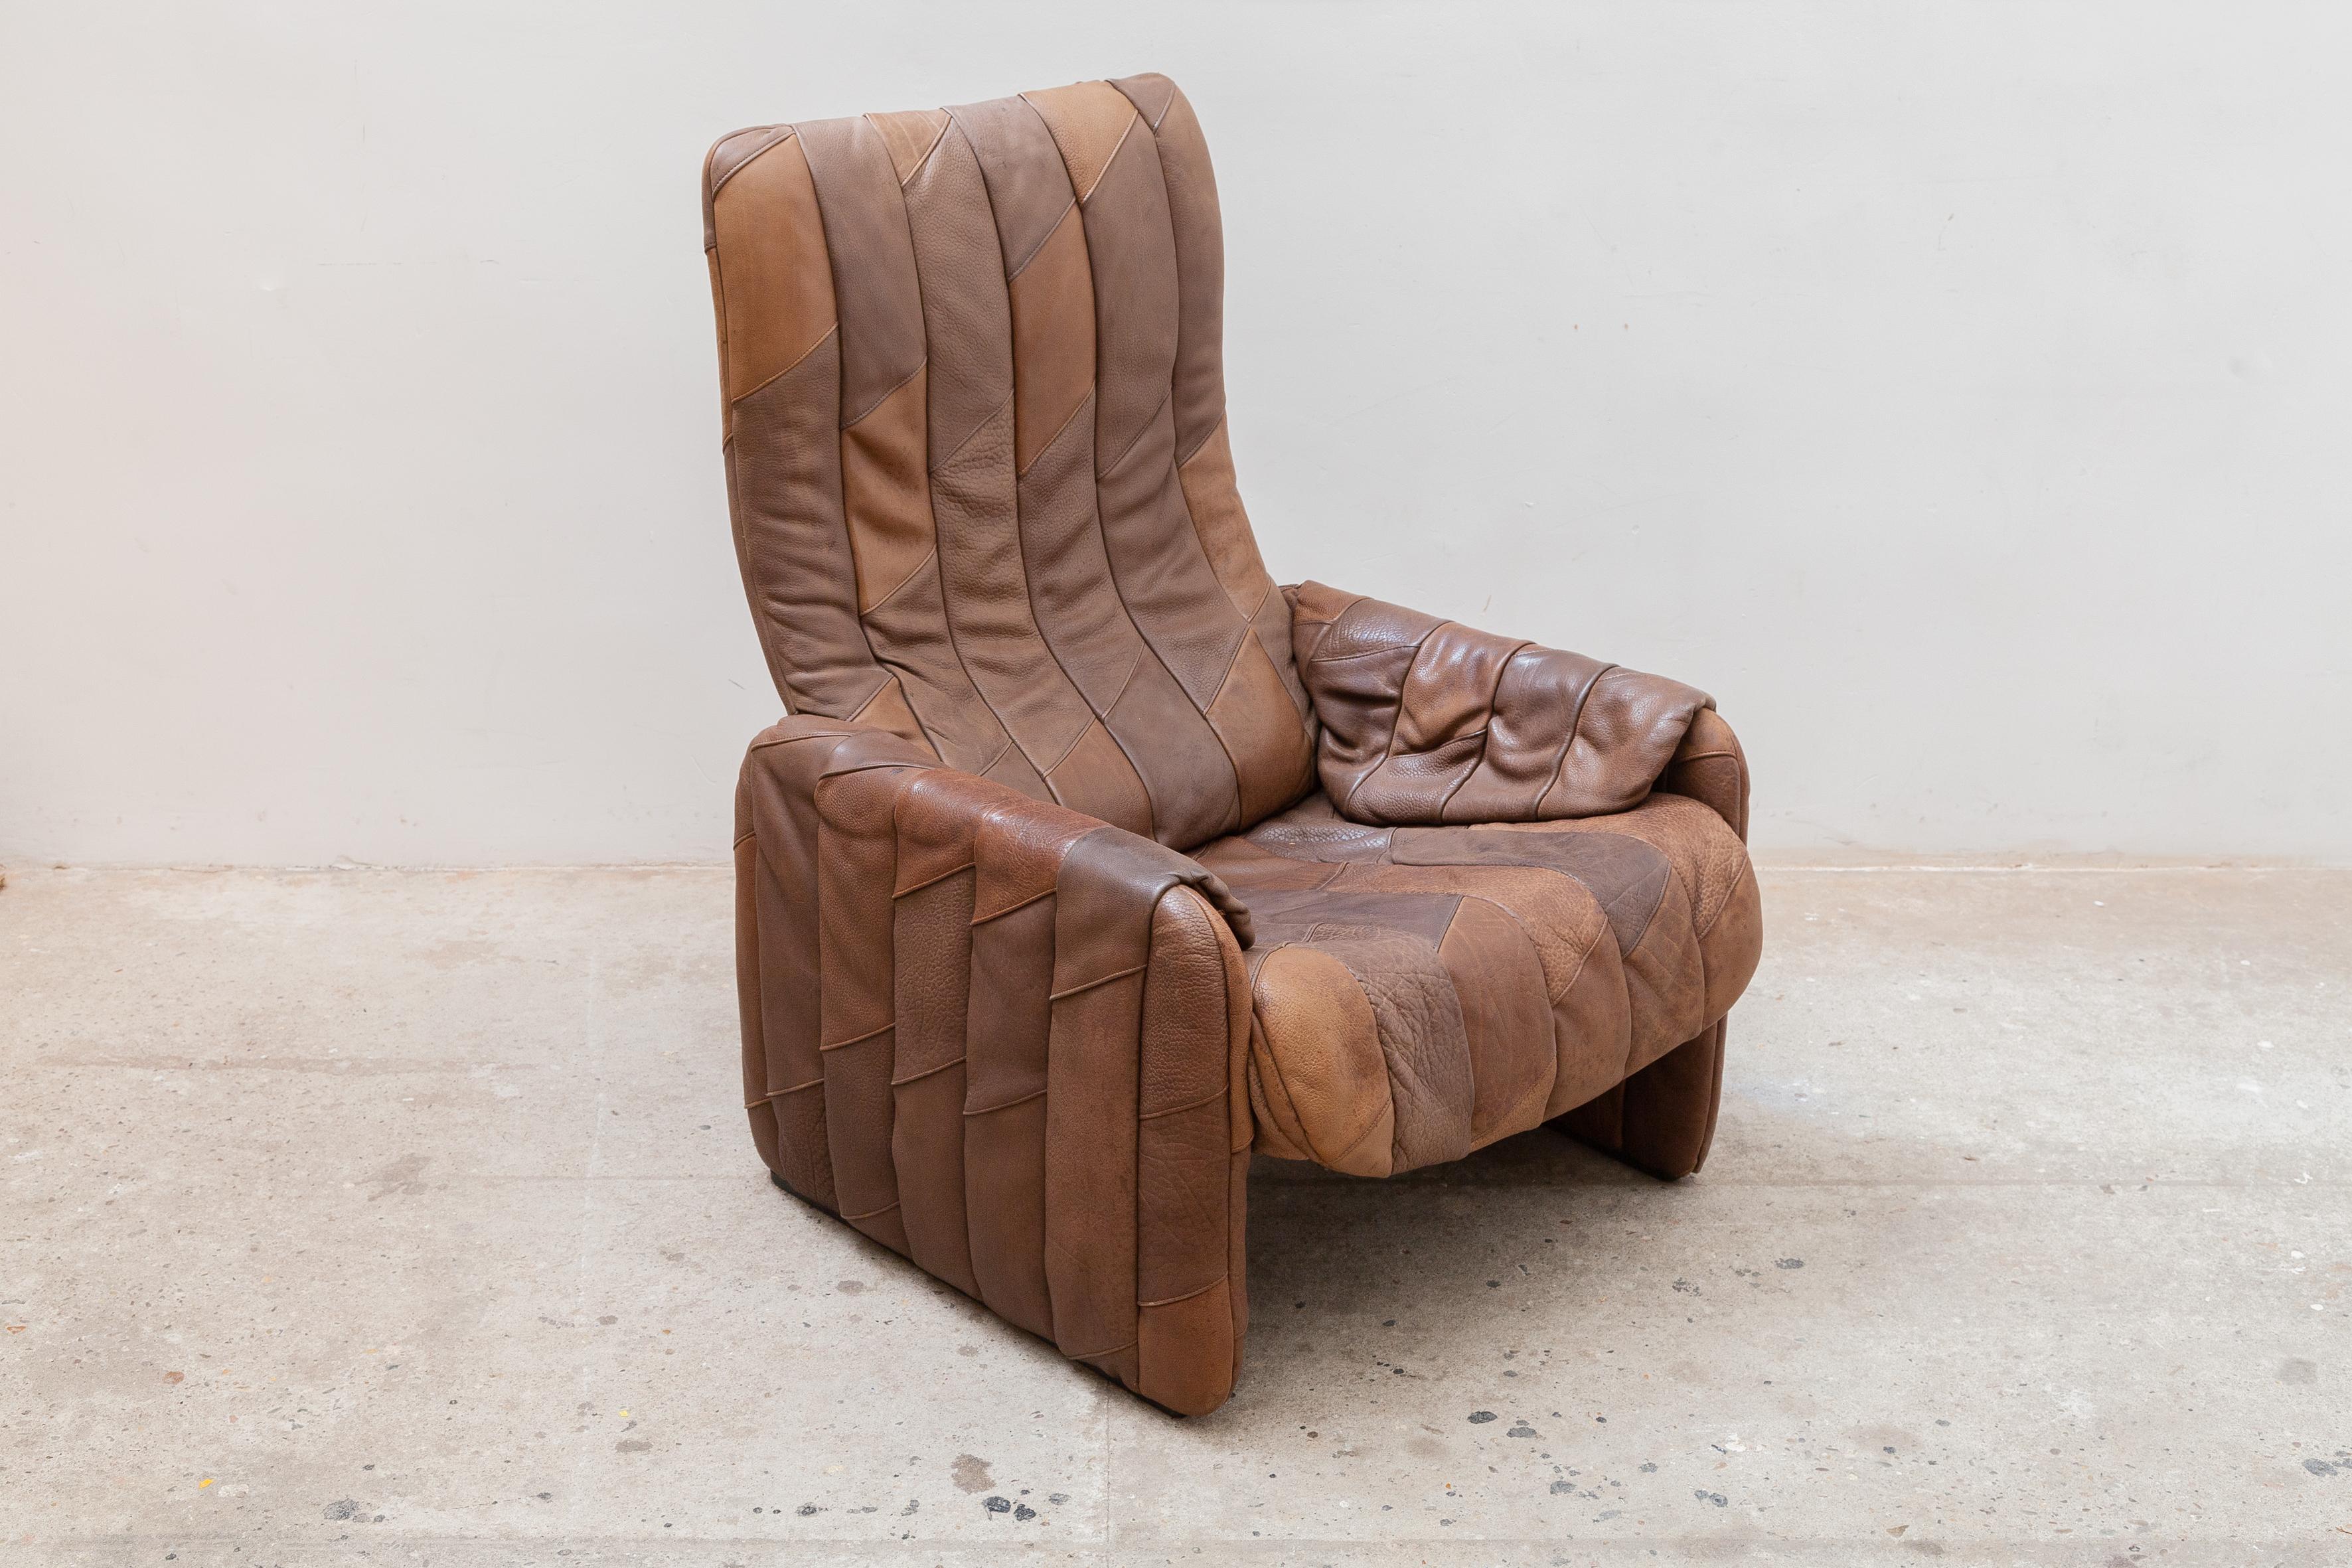 A comfortable soft leather lounge chair from the seventies that differs from the average De Sede chairs its own character created by the accent of the patchwork makes the chair in your interior an eye-catcher in addition to being a relax. The chair